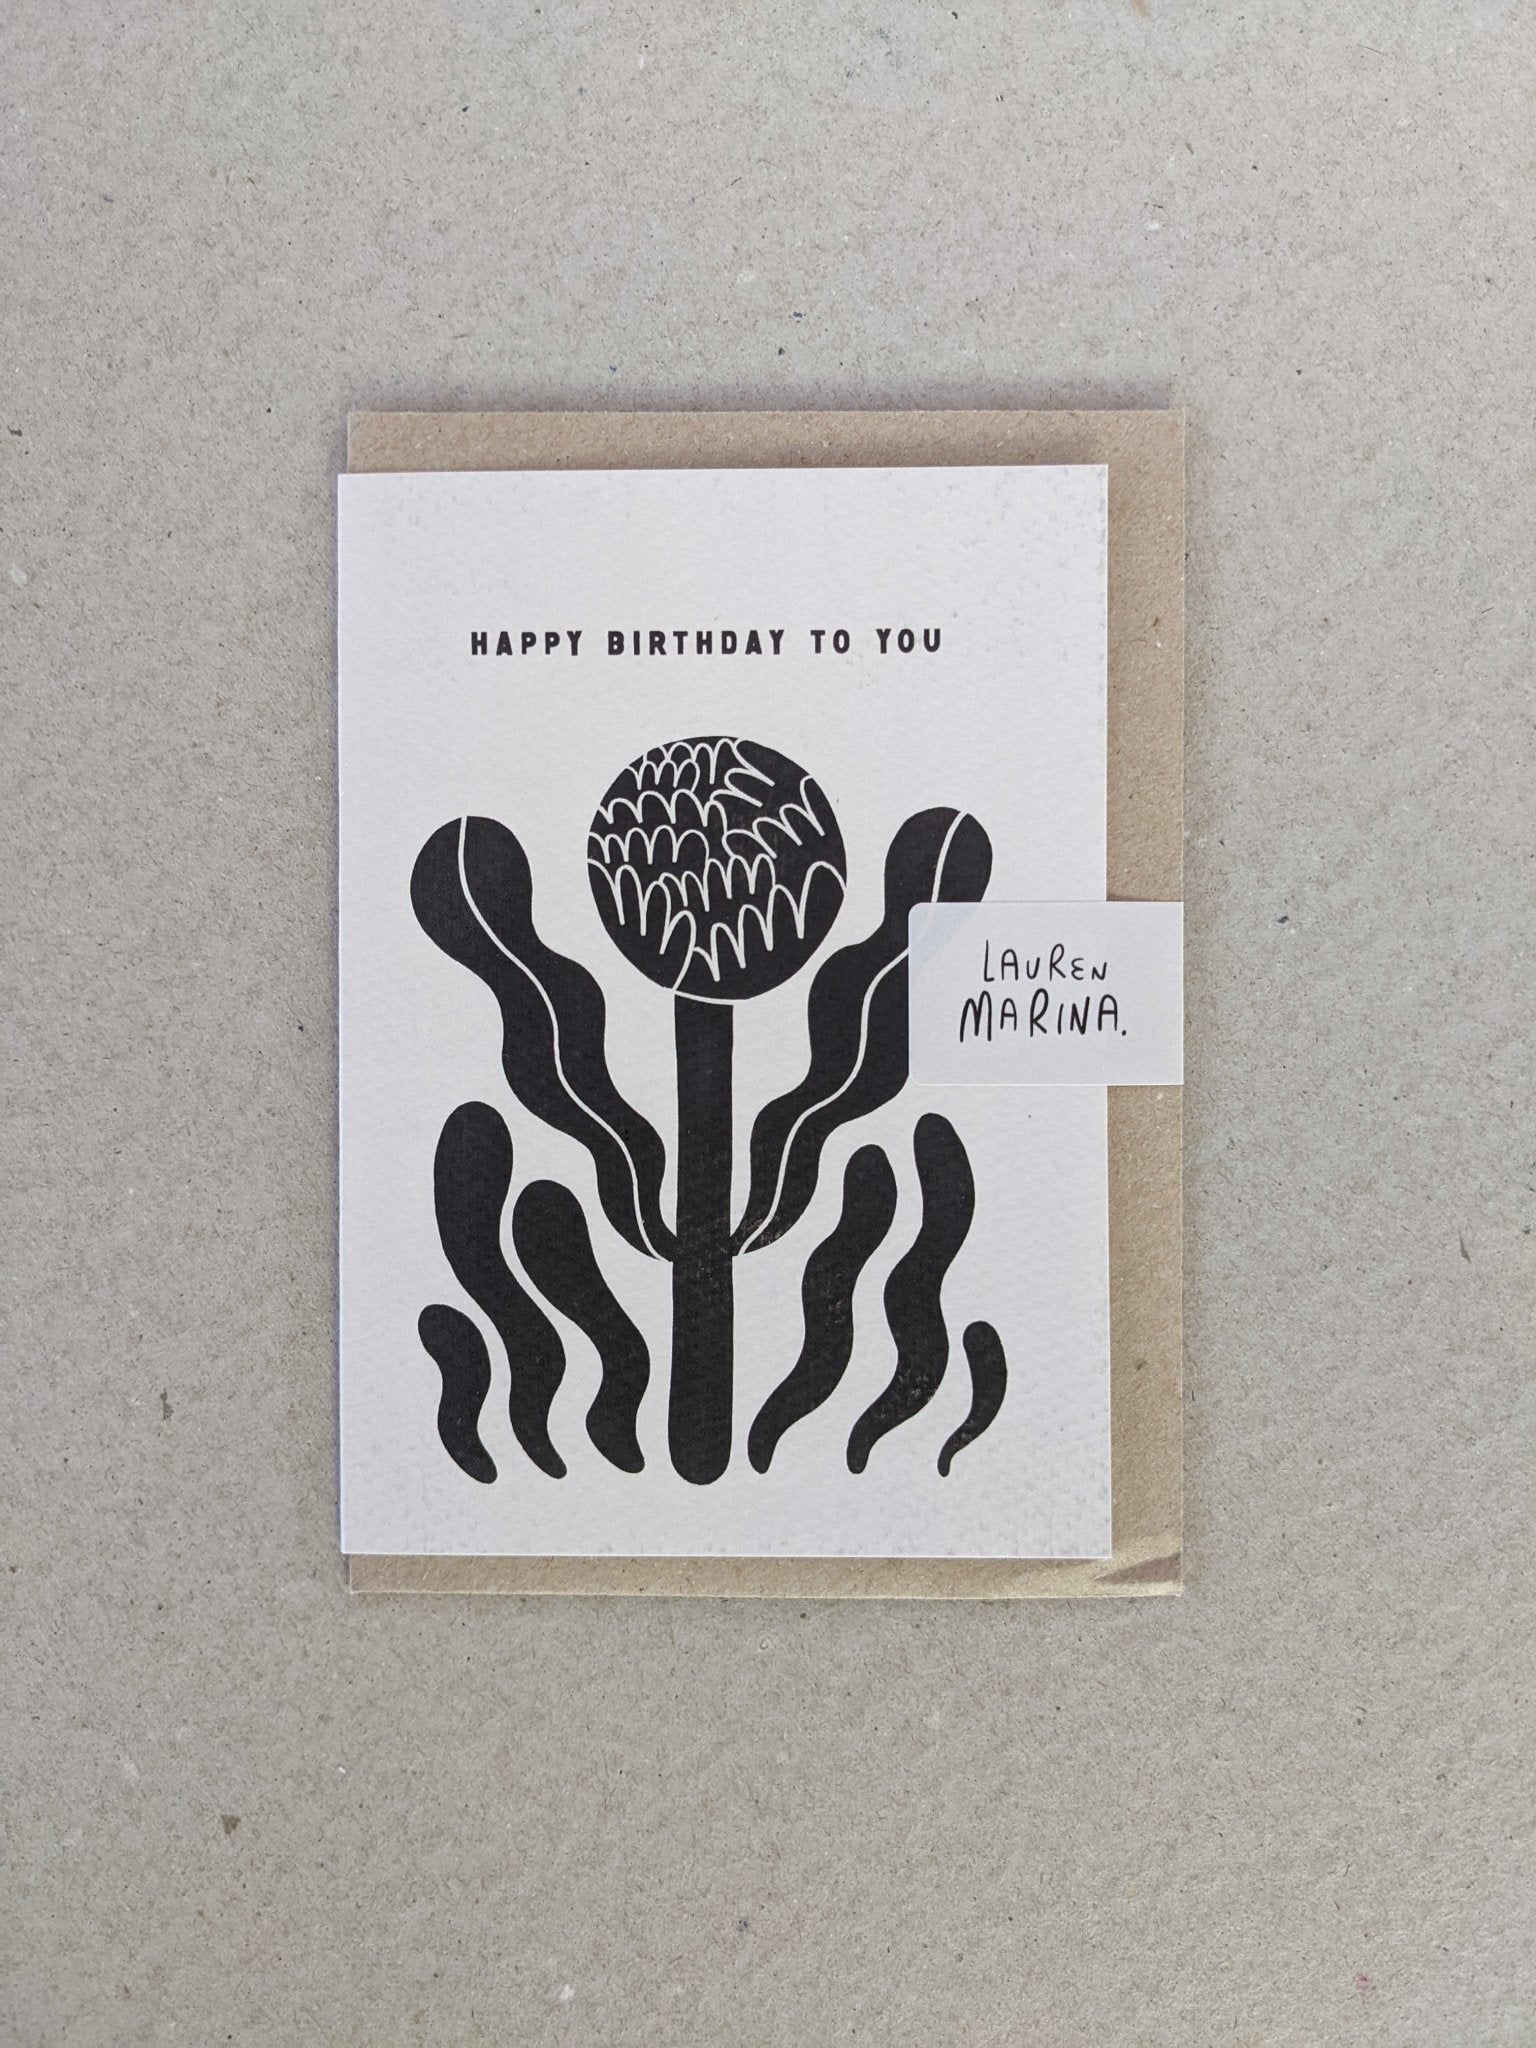 Happy Birthday To You Greetings Card - The Stationery Cupboard